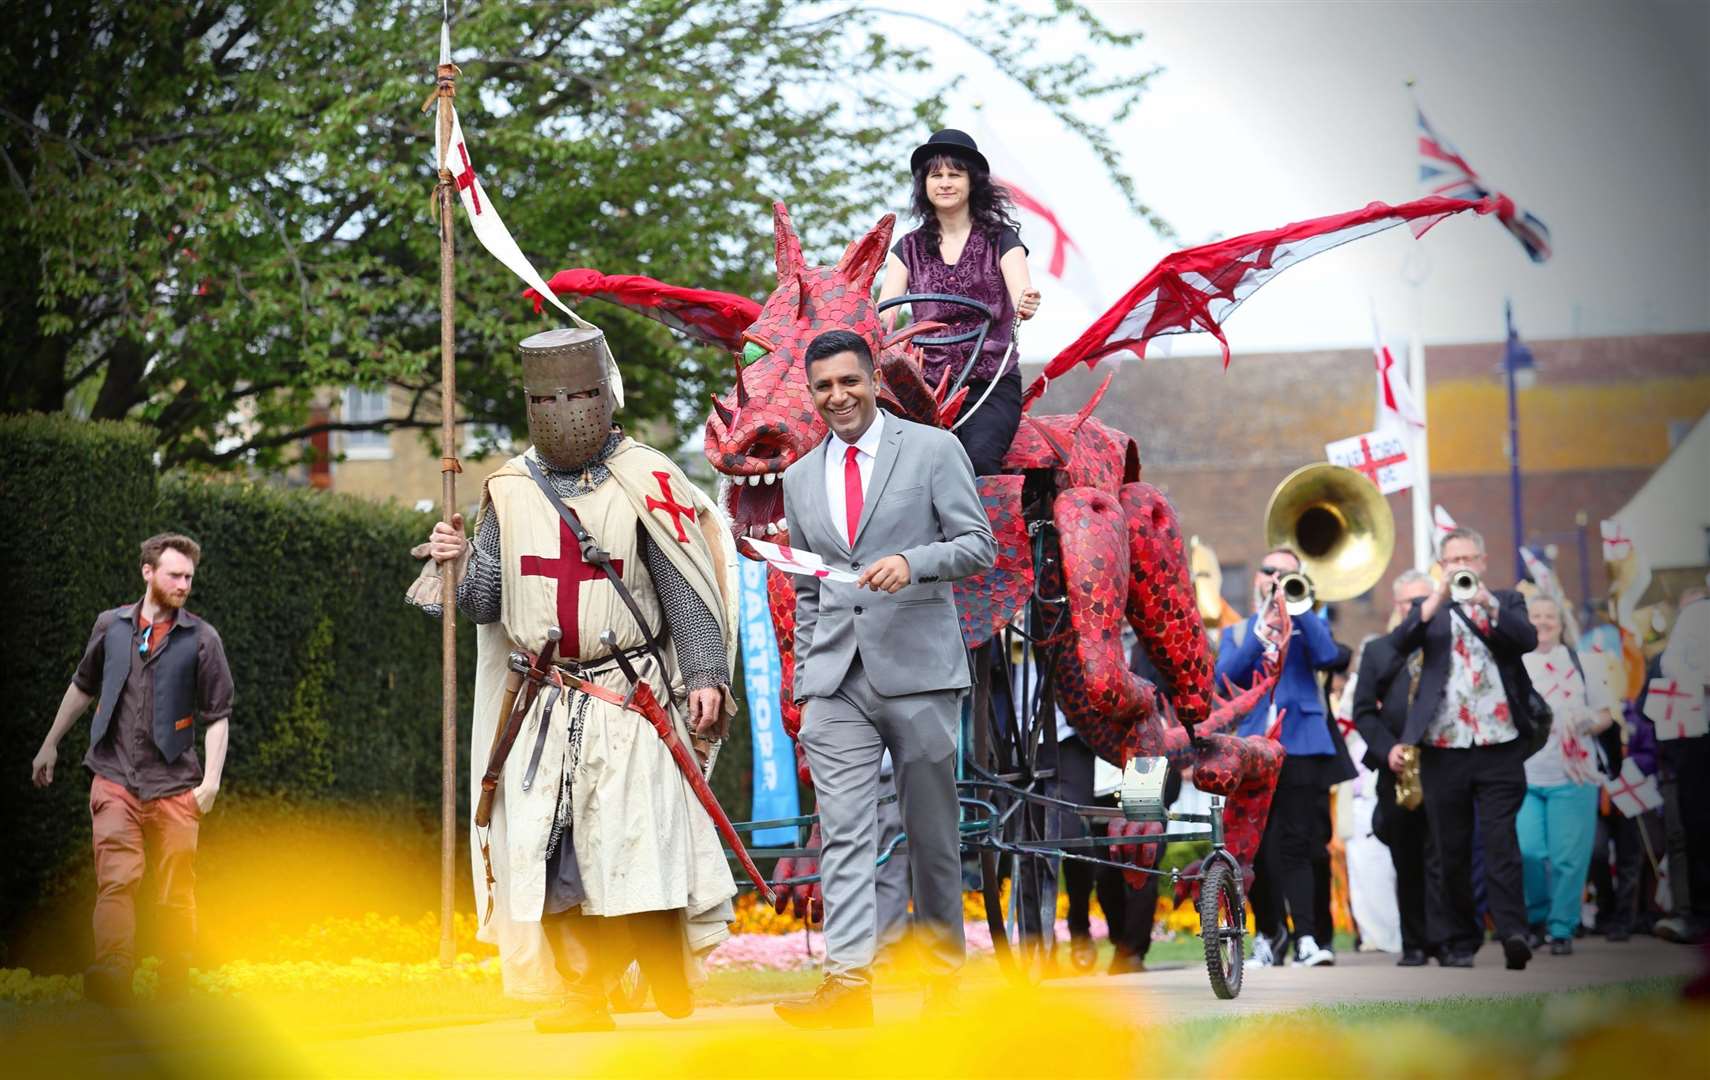 Cohesion Plus artistic director Gurvinder Sandher joined by a Saint George's knight in 2019